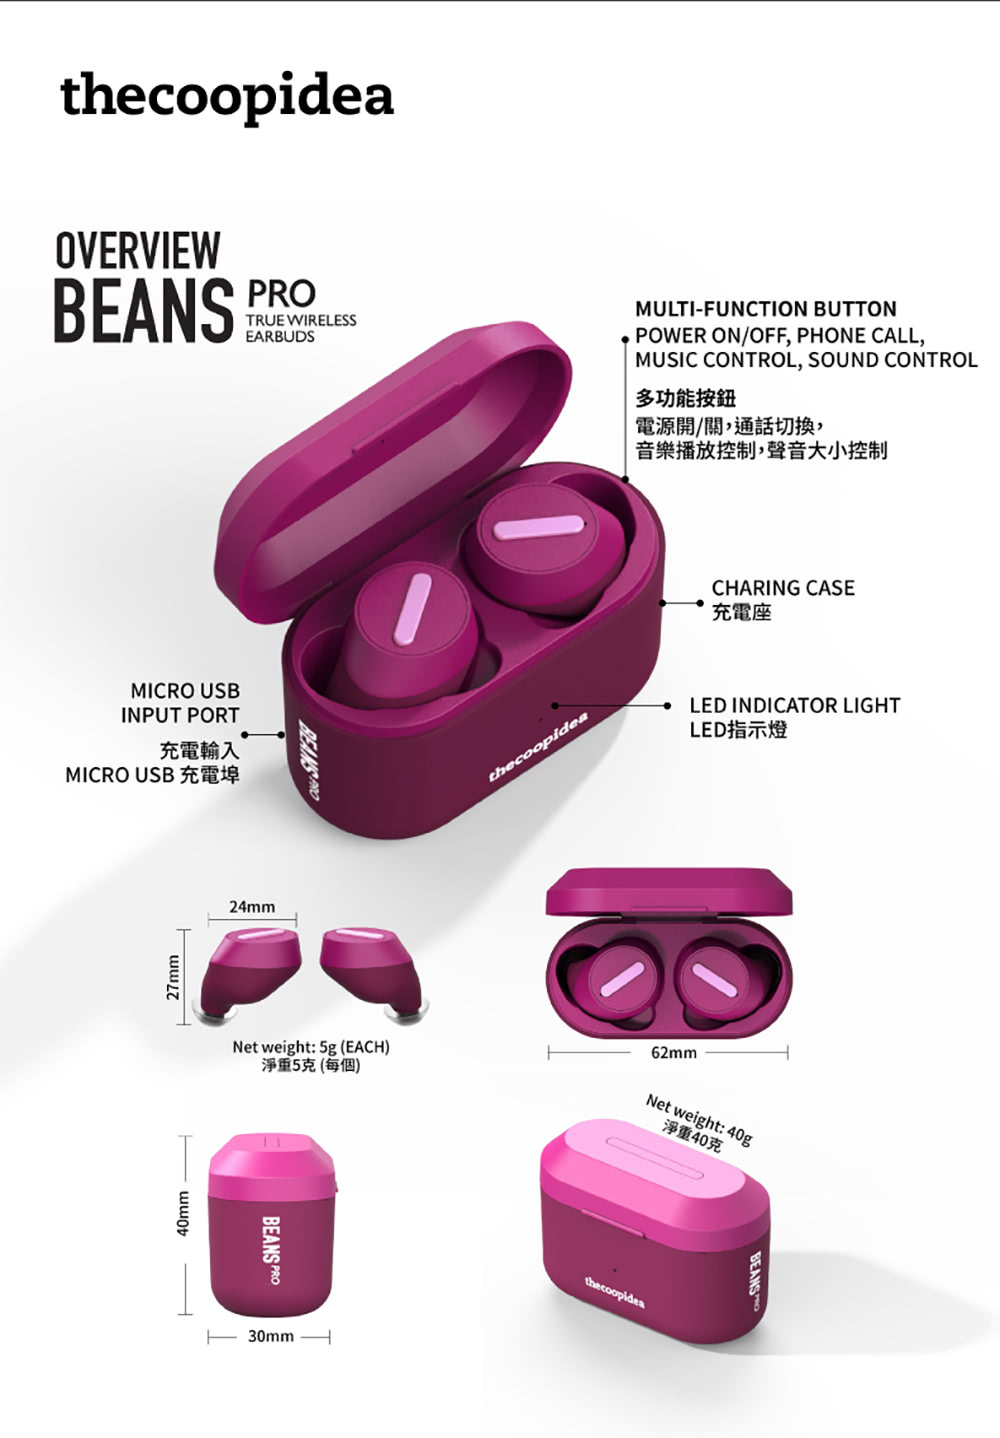 beans pro earbuds